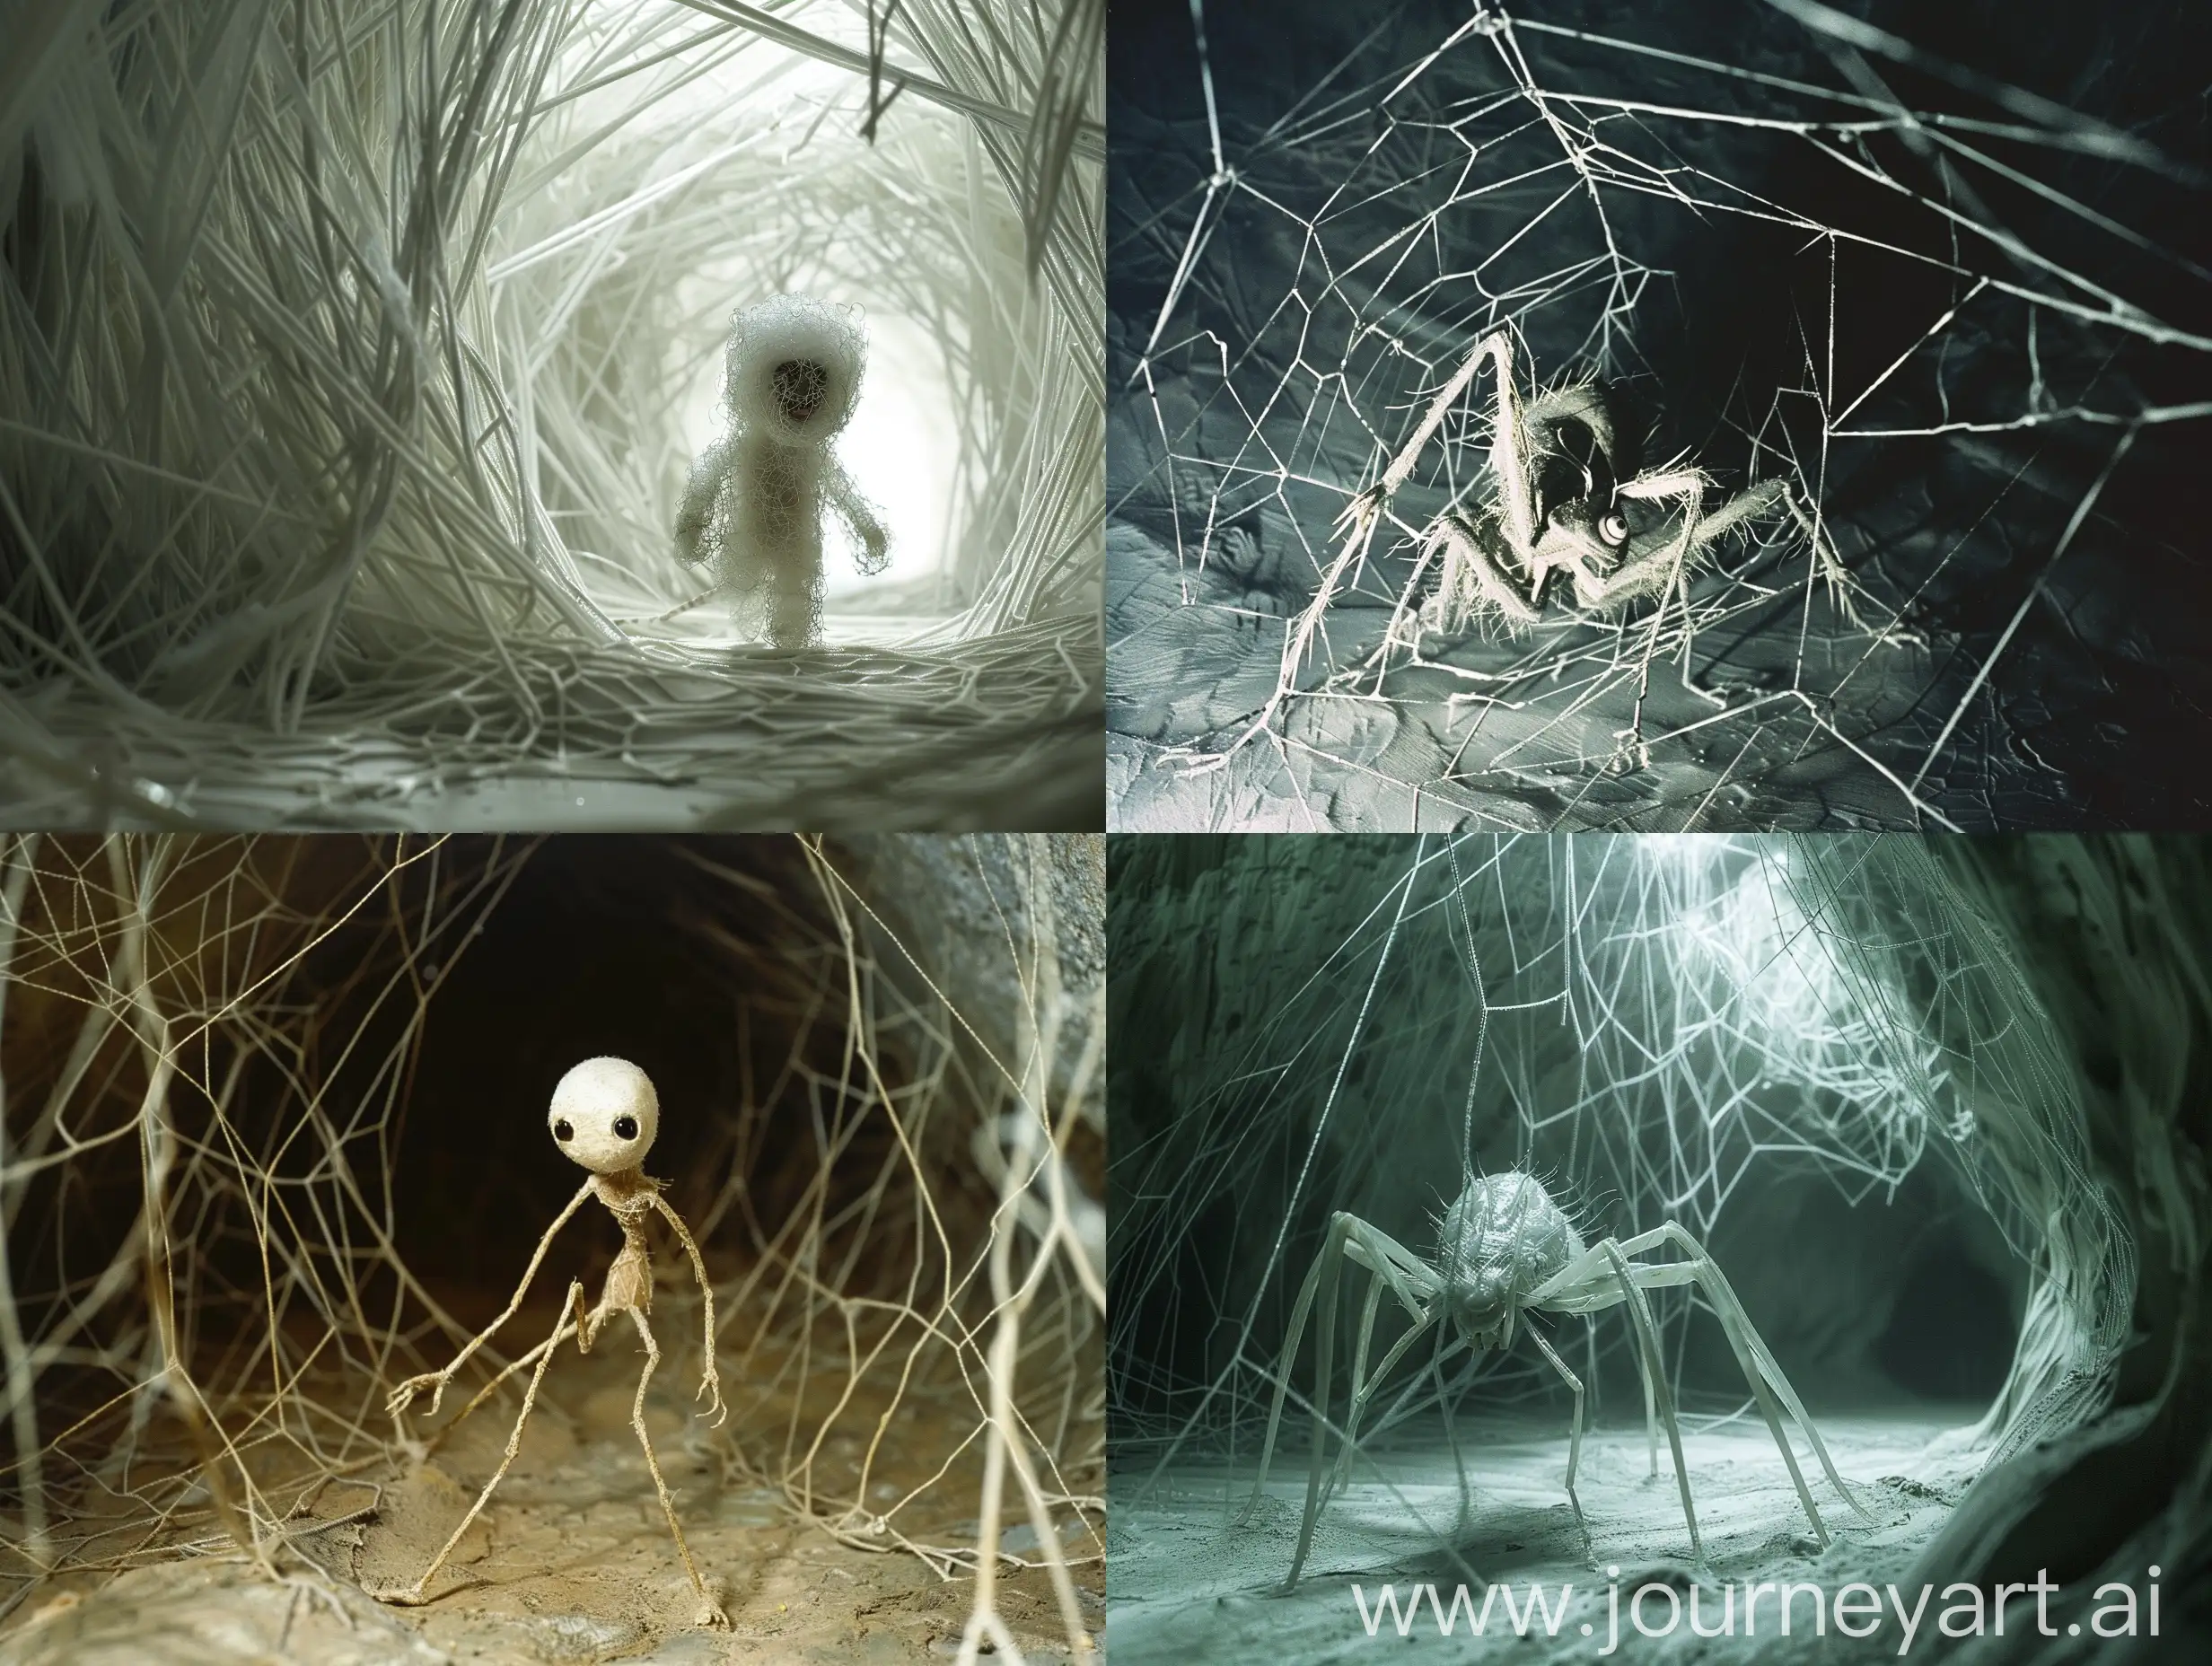 Cinematic-Portrait-of-a-Japanese-Yokai-in-Dilapidated-Cave-Environment